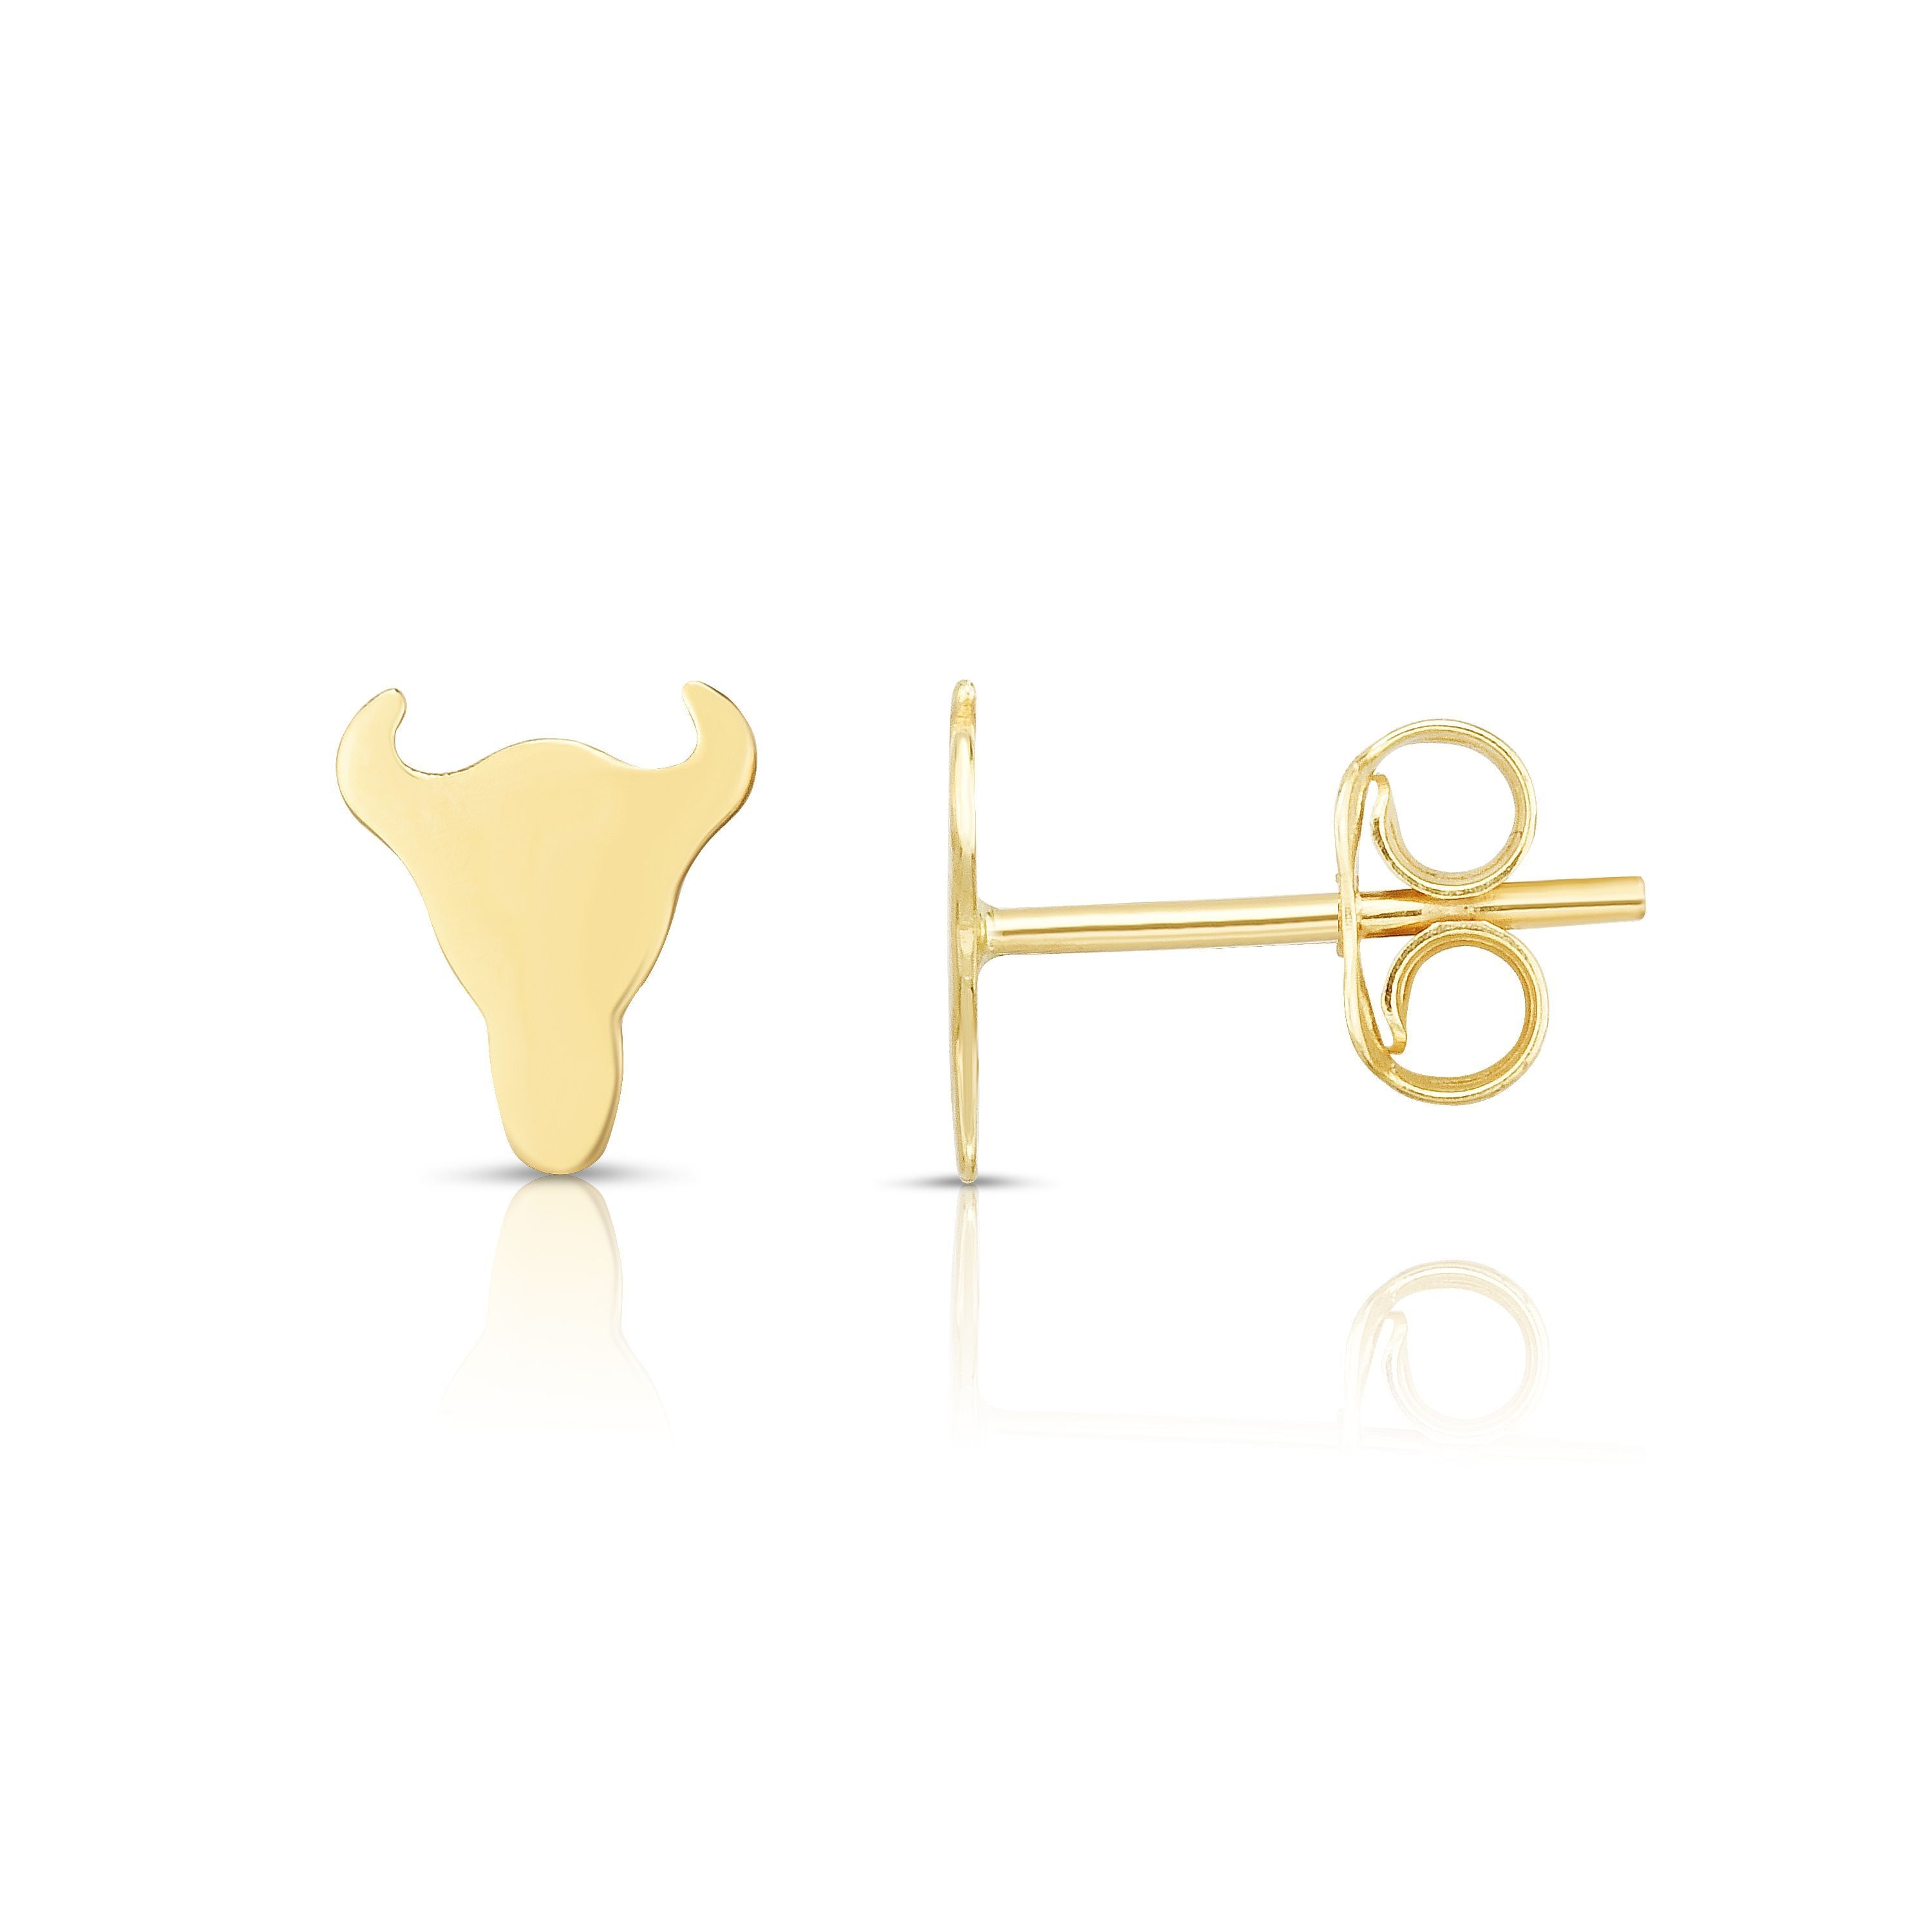 Polished Post Bulls Head Earring with Push Back Clasp